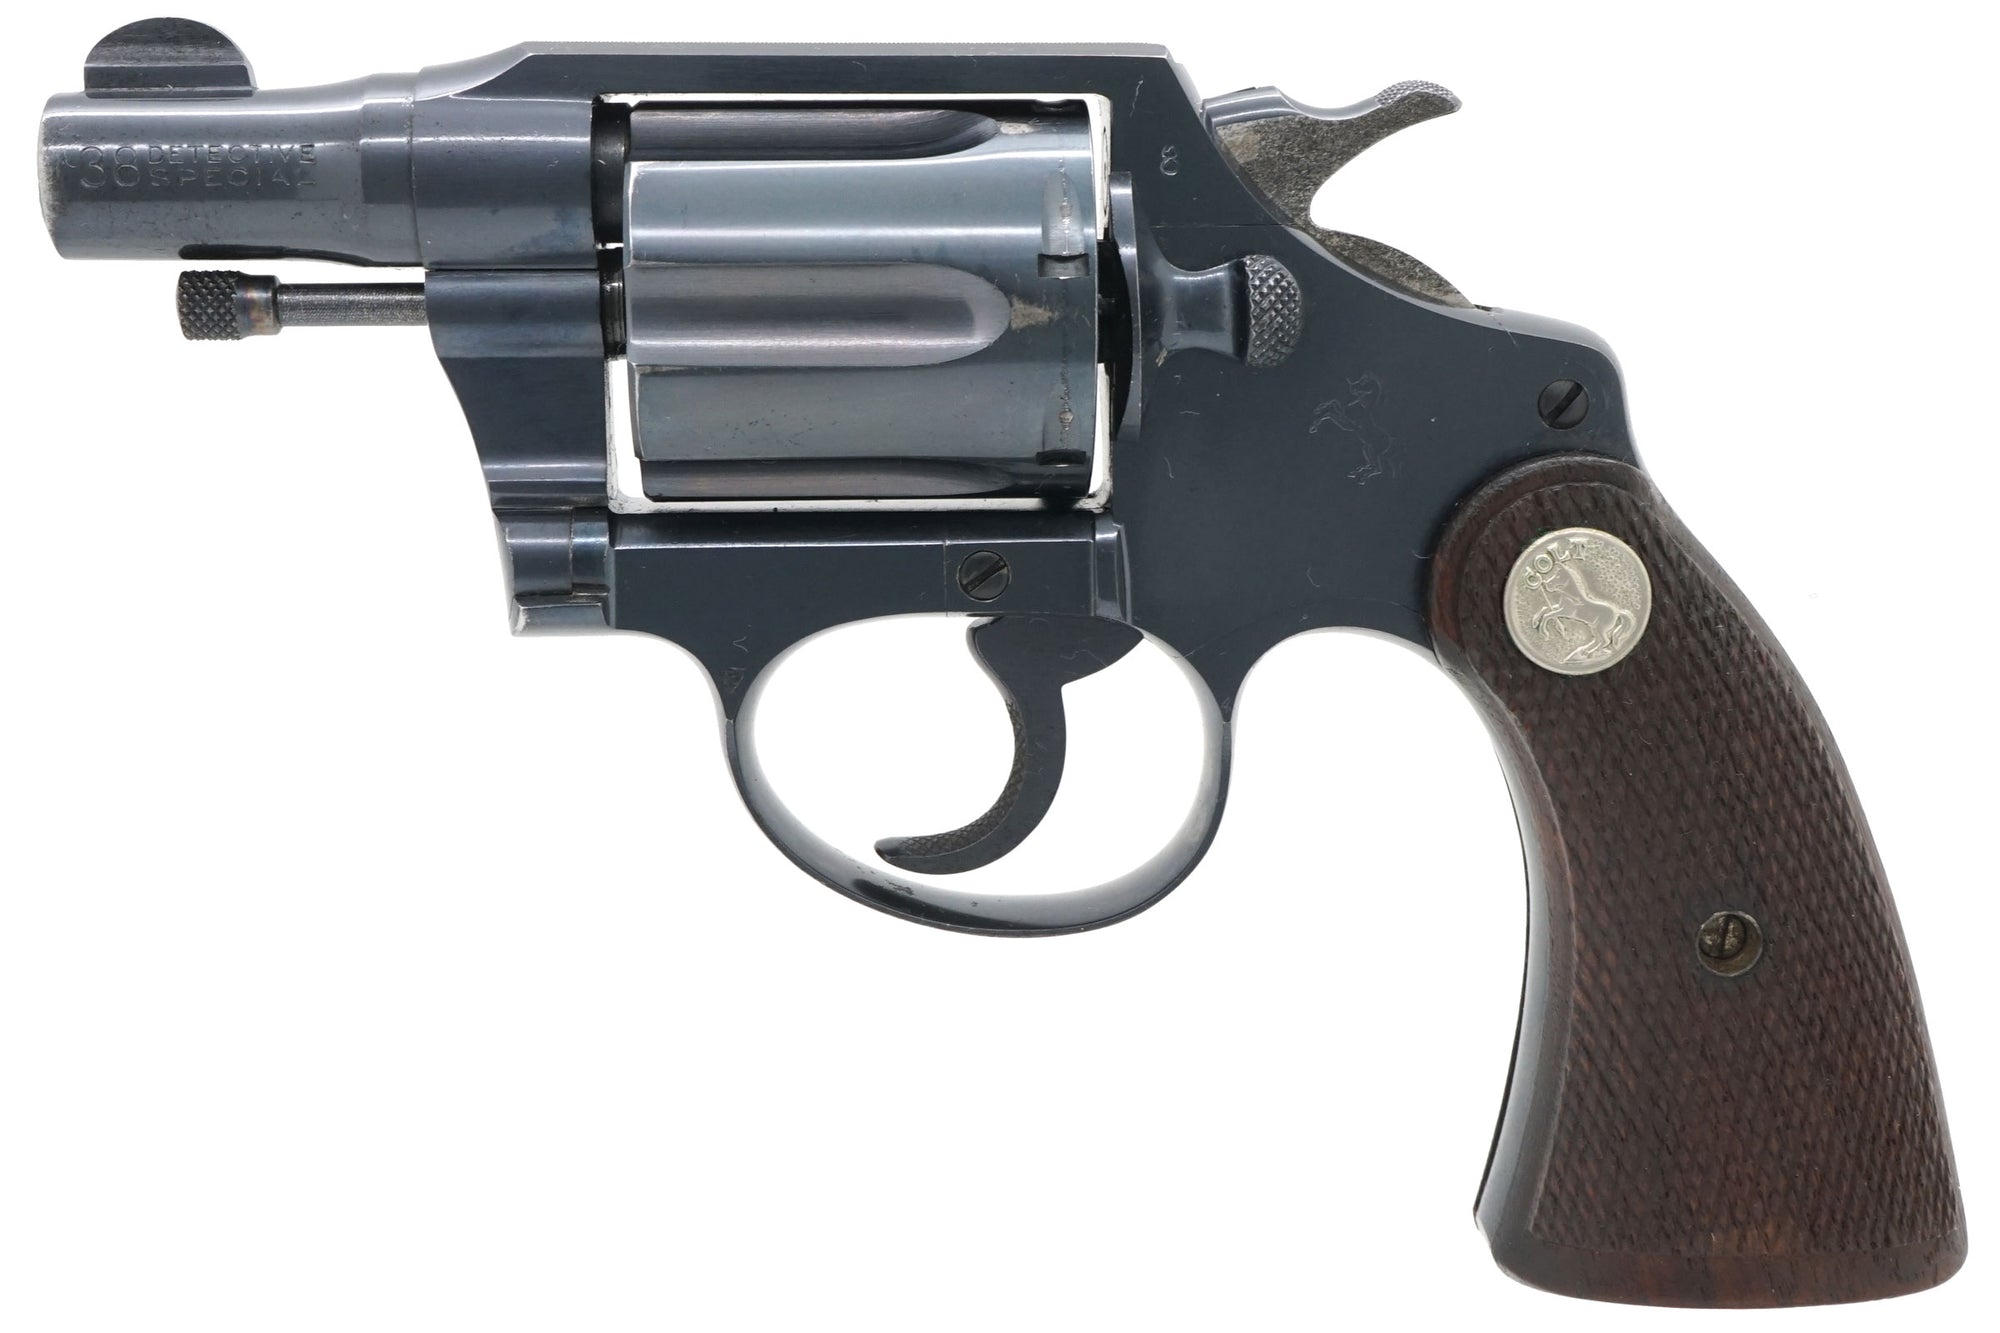 Colt Detective Special 38 SN:444747 MFG:1943 - CIC